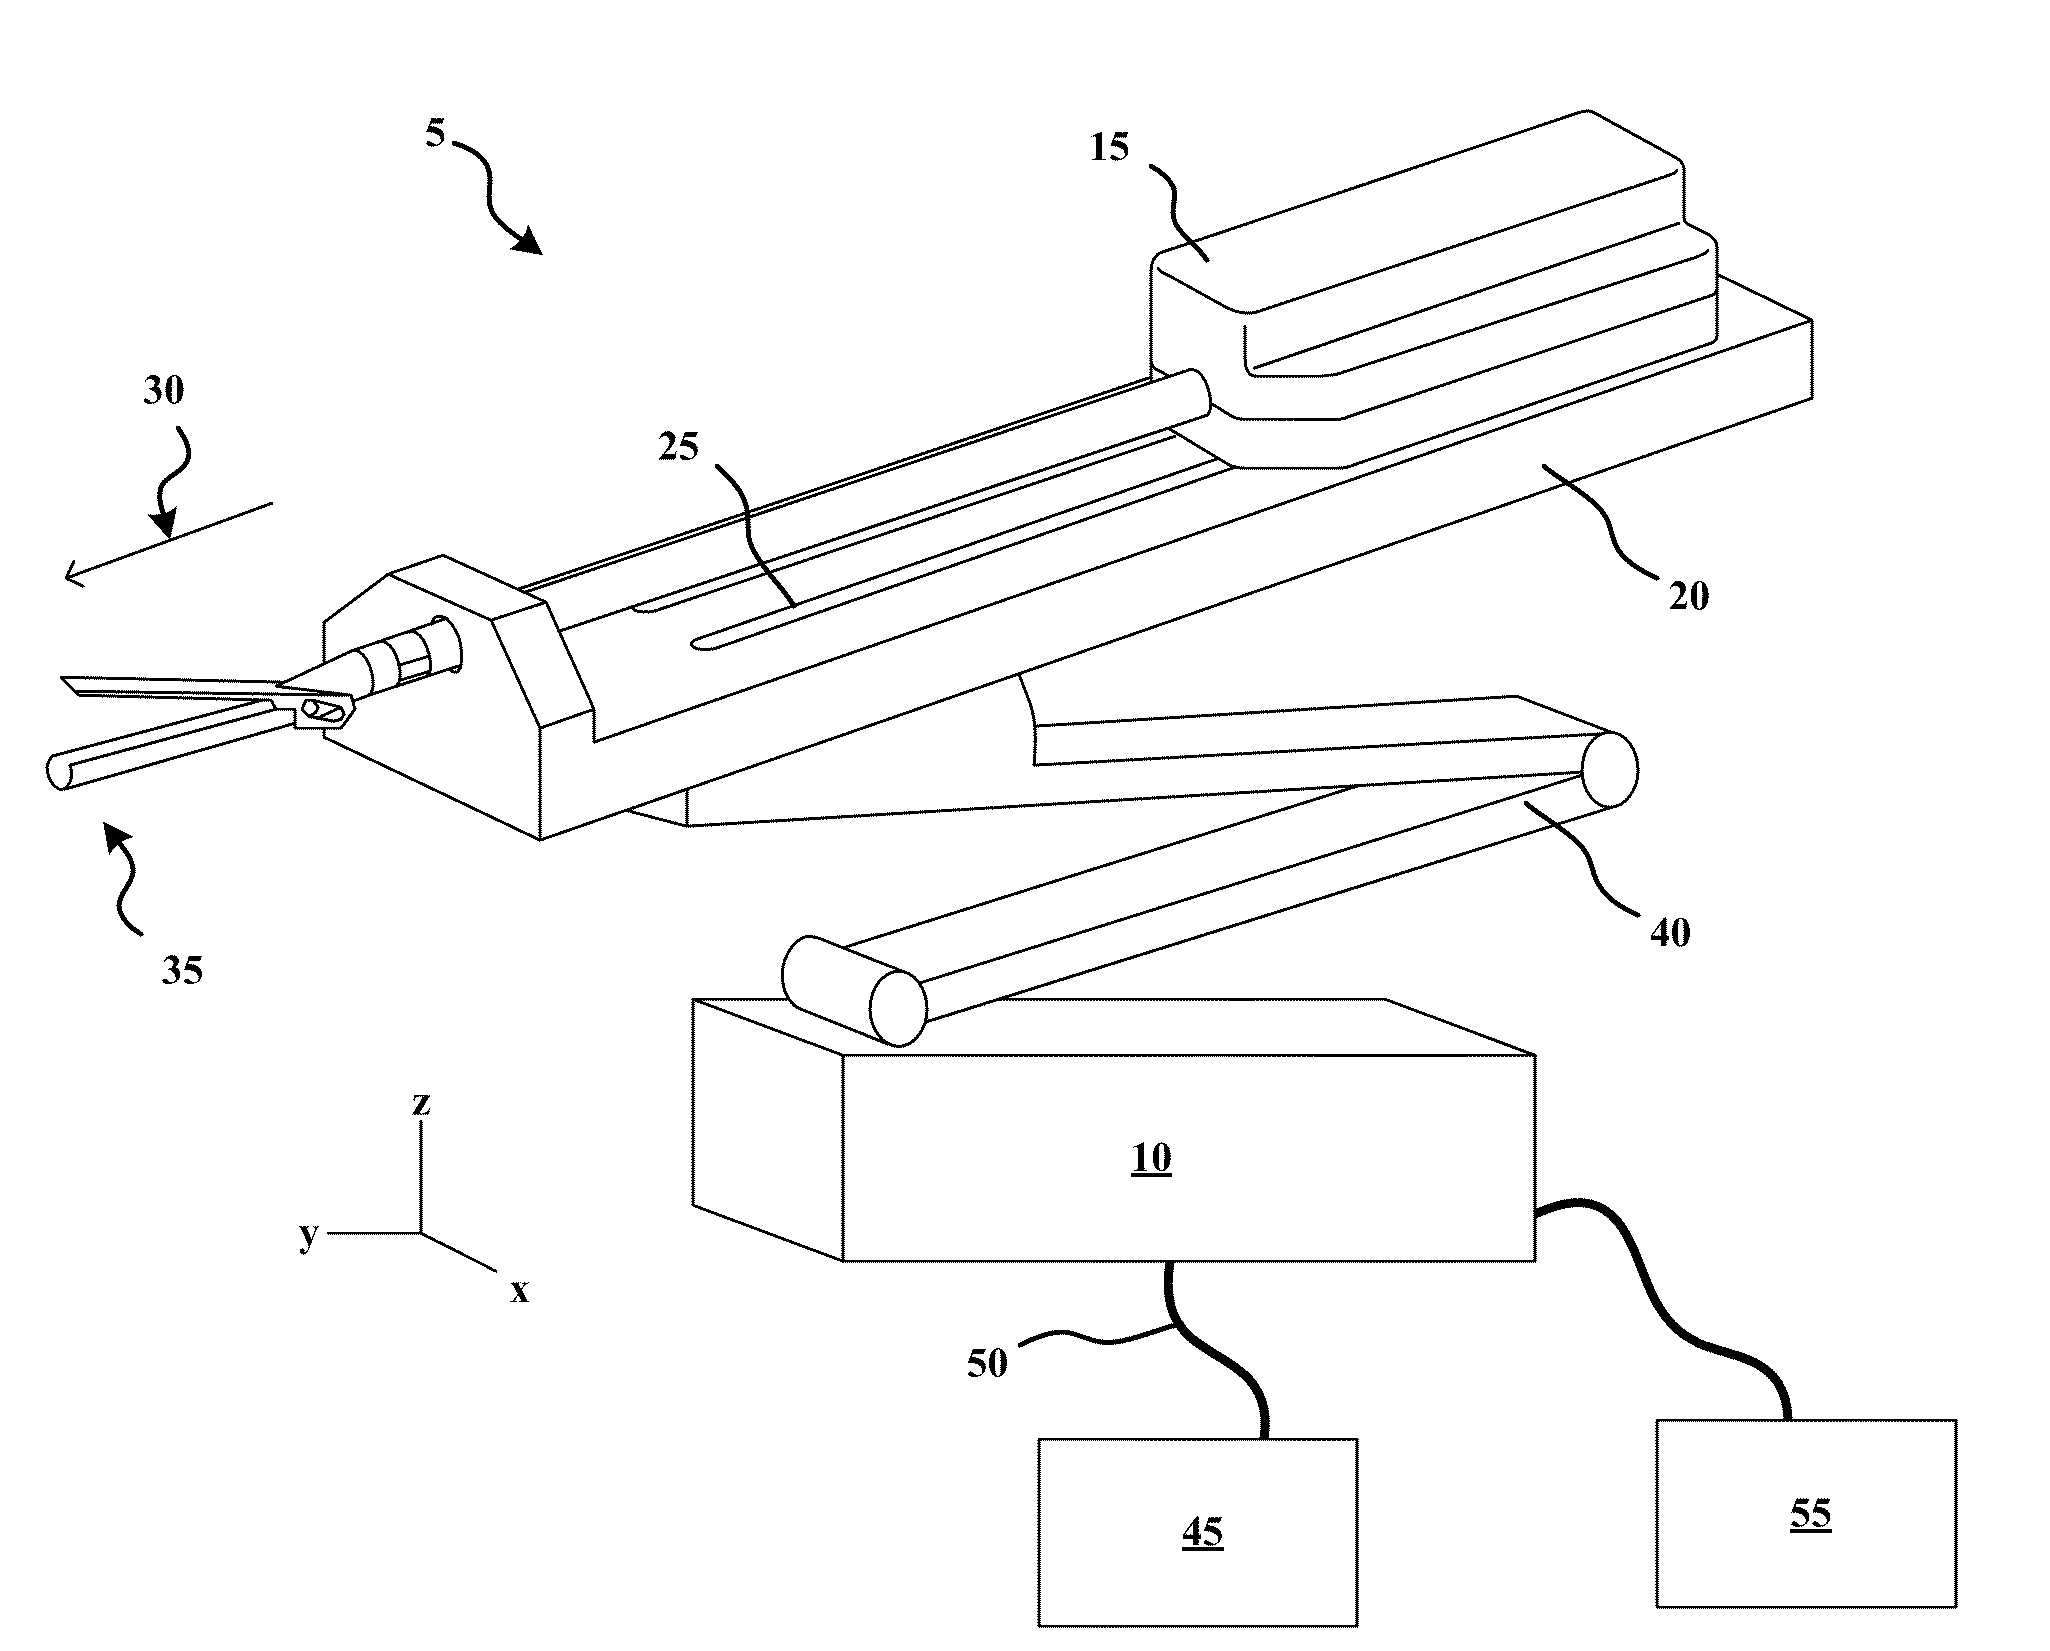 Surgical attachment for use with a robotic surgical system